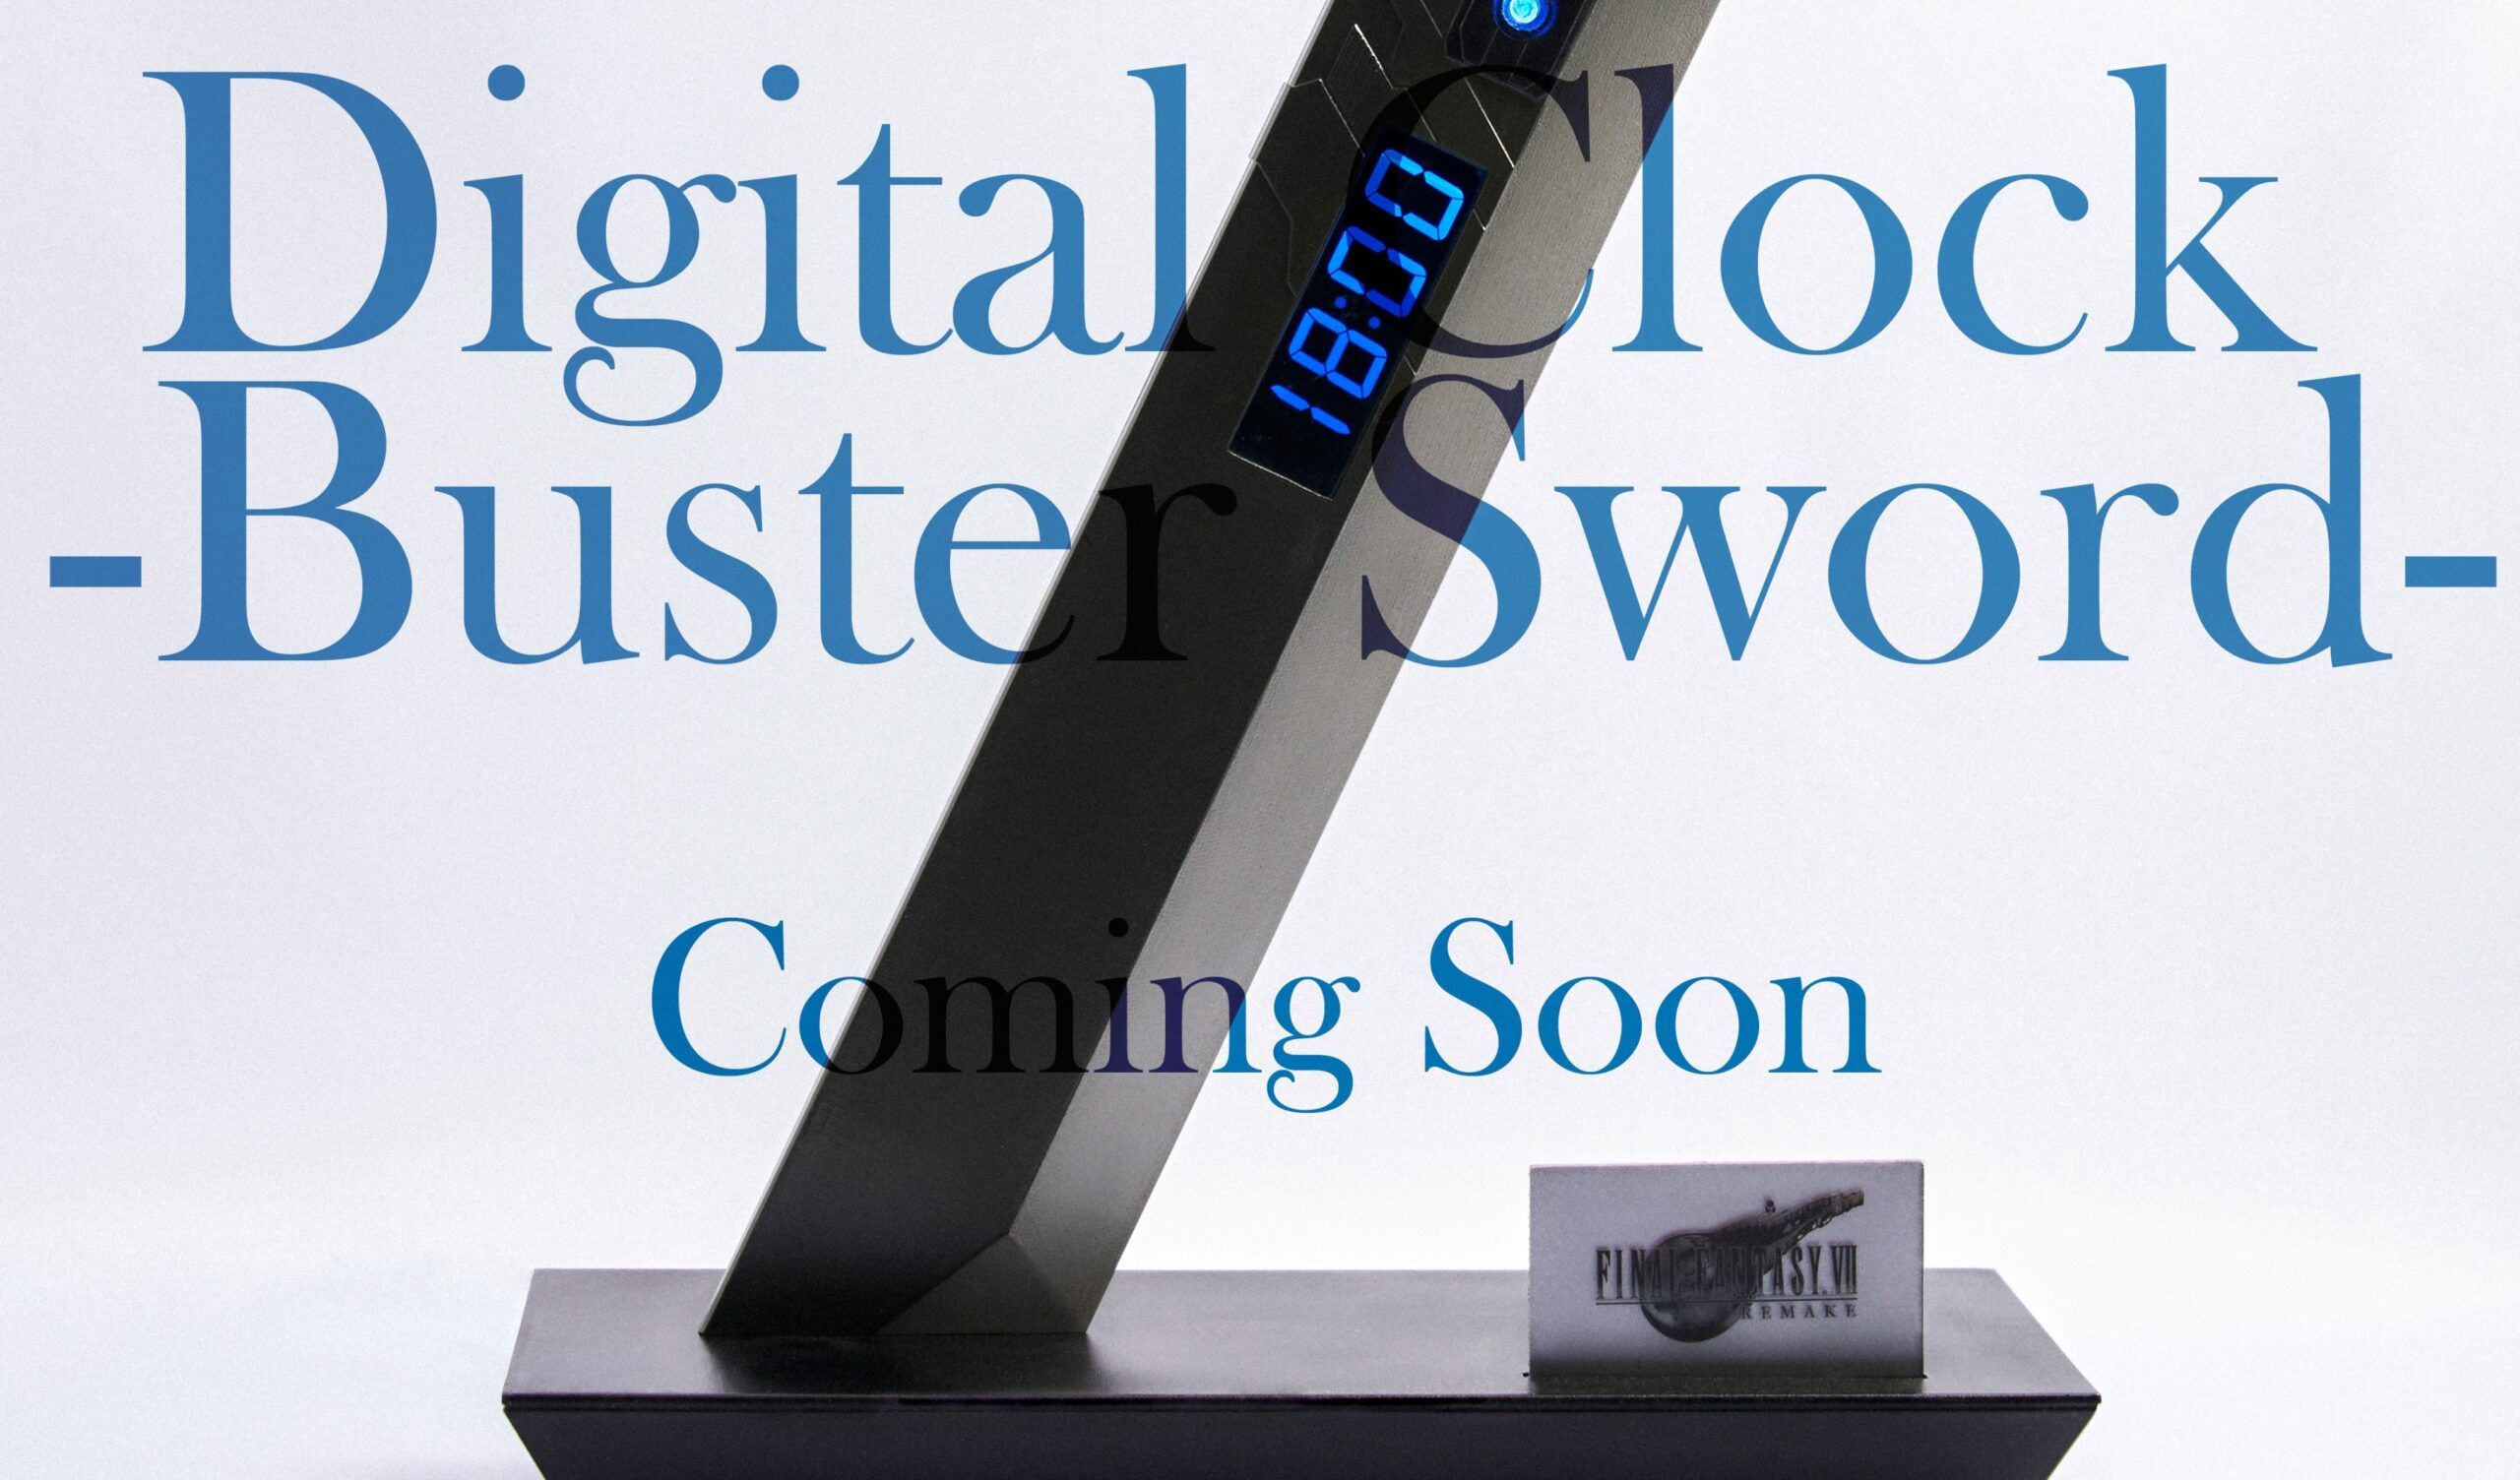 Buster Sword Alarm Clock Revealed For Final Fantasy 7 25th Anniversary